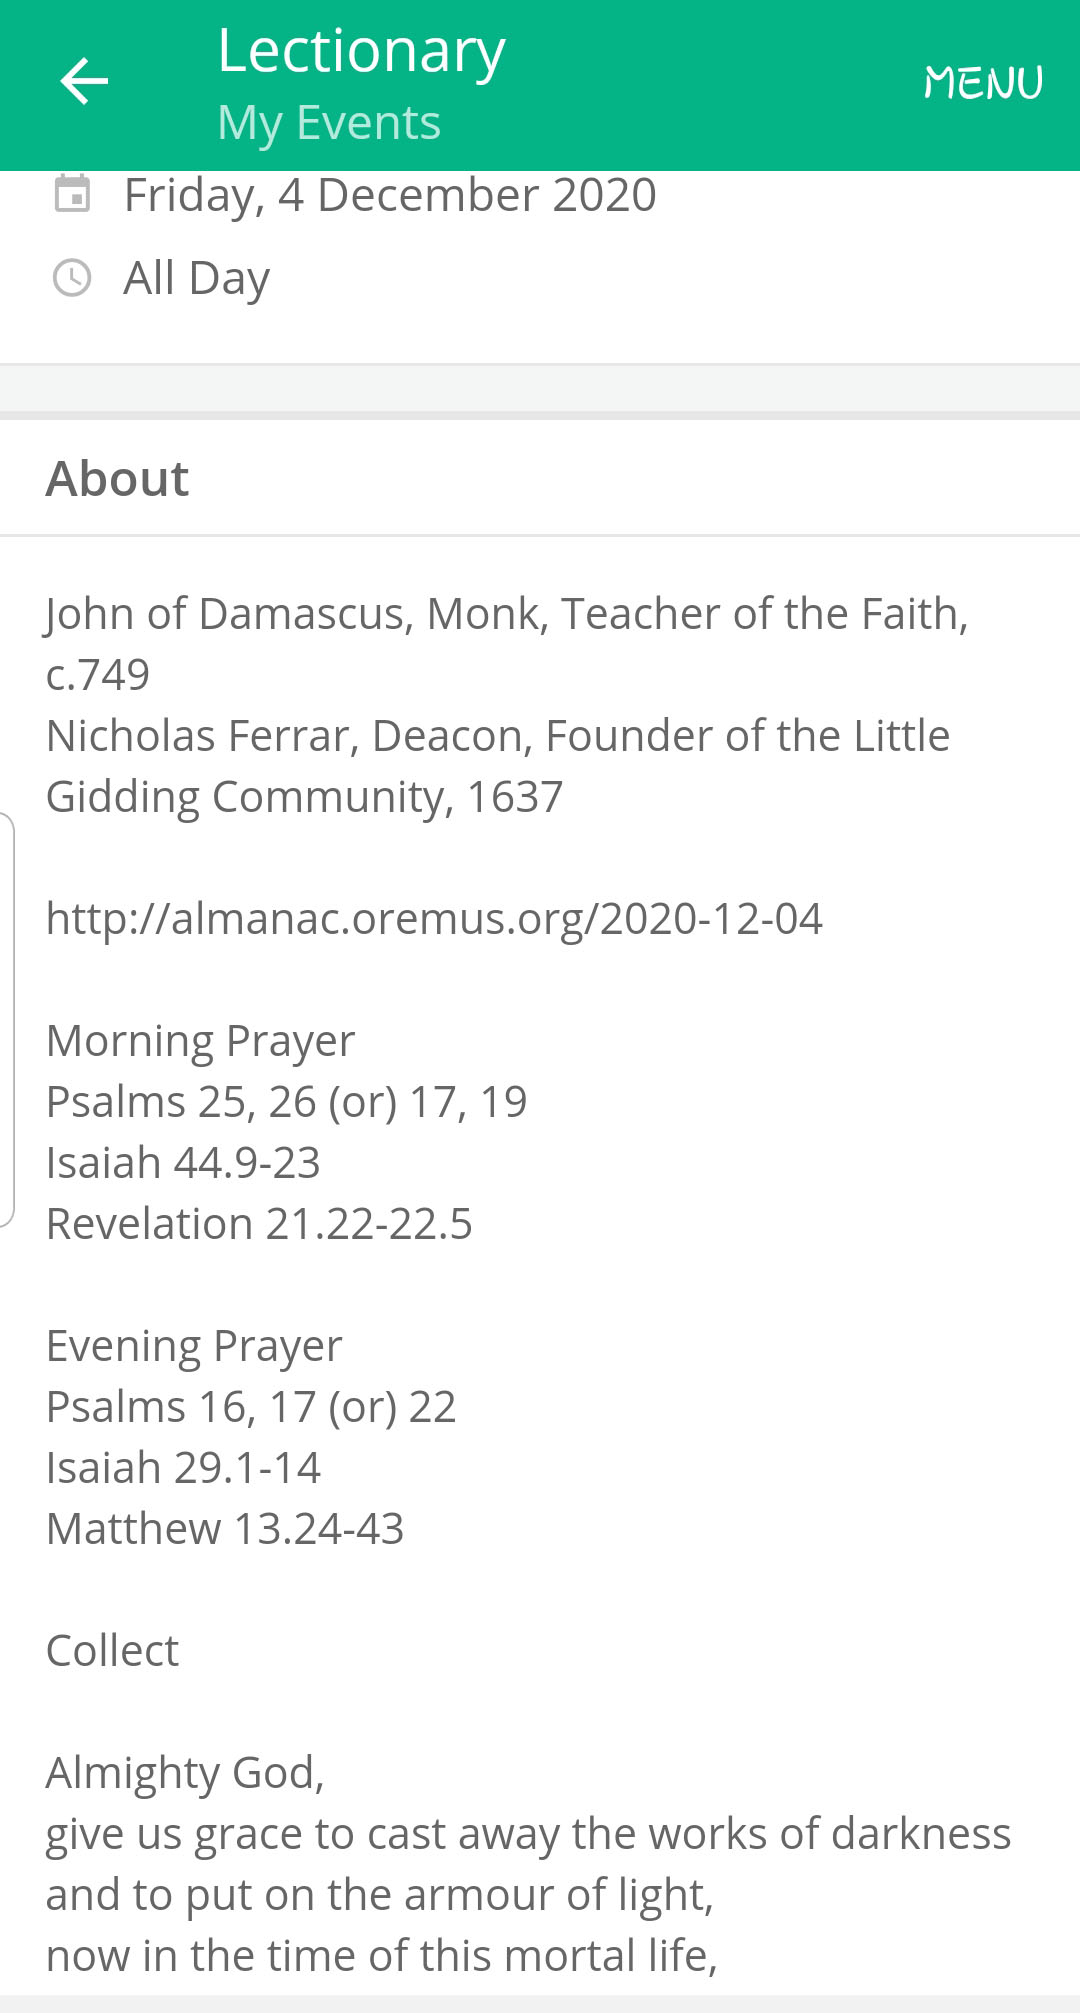 Lectionary 1